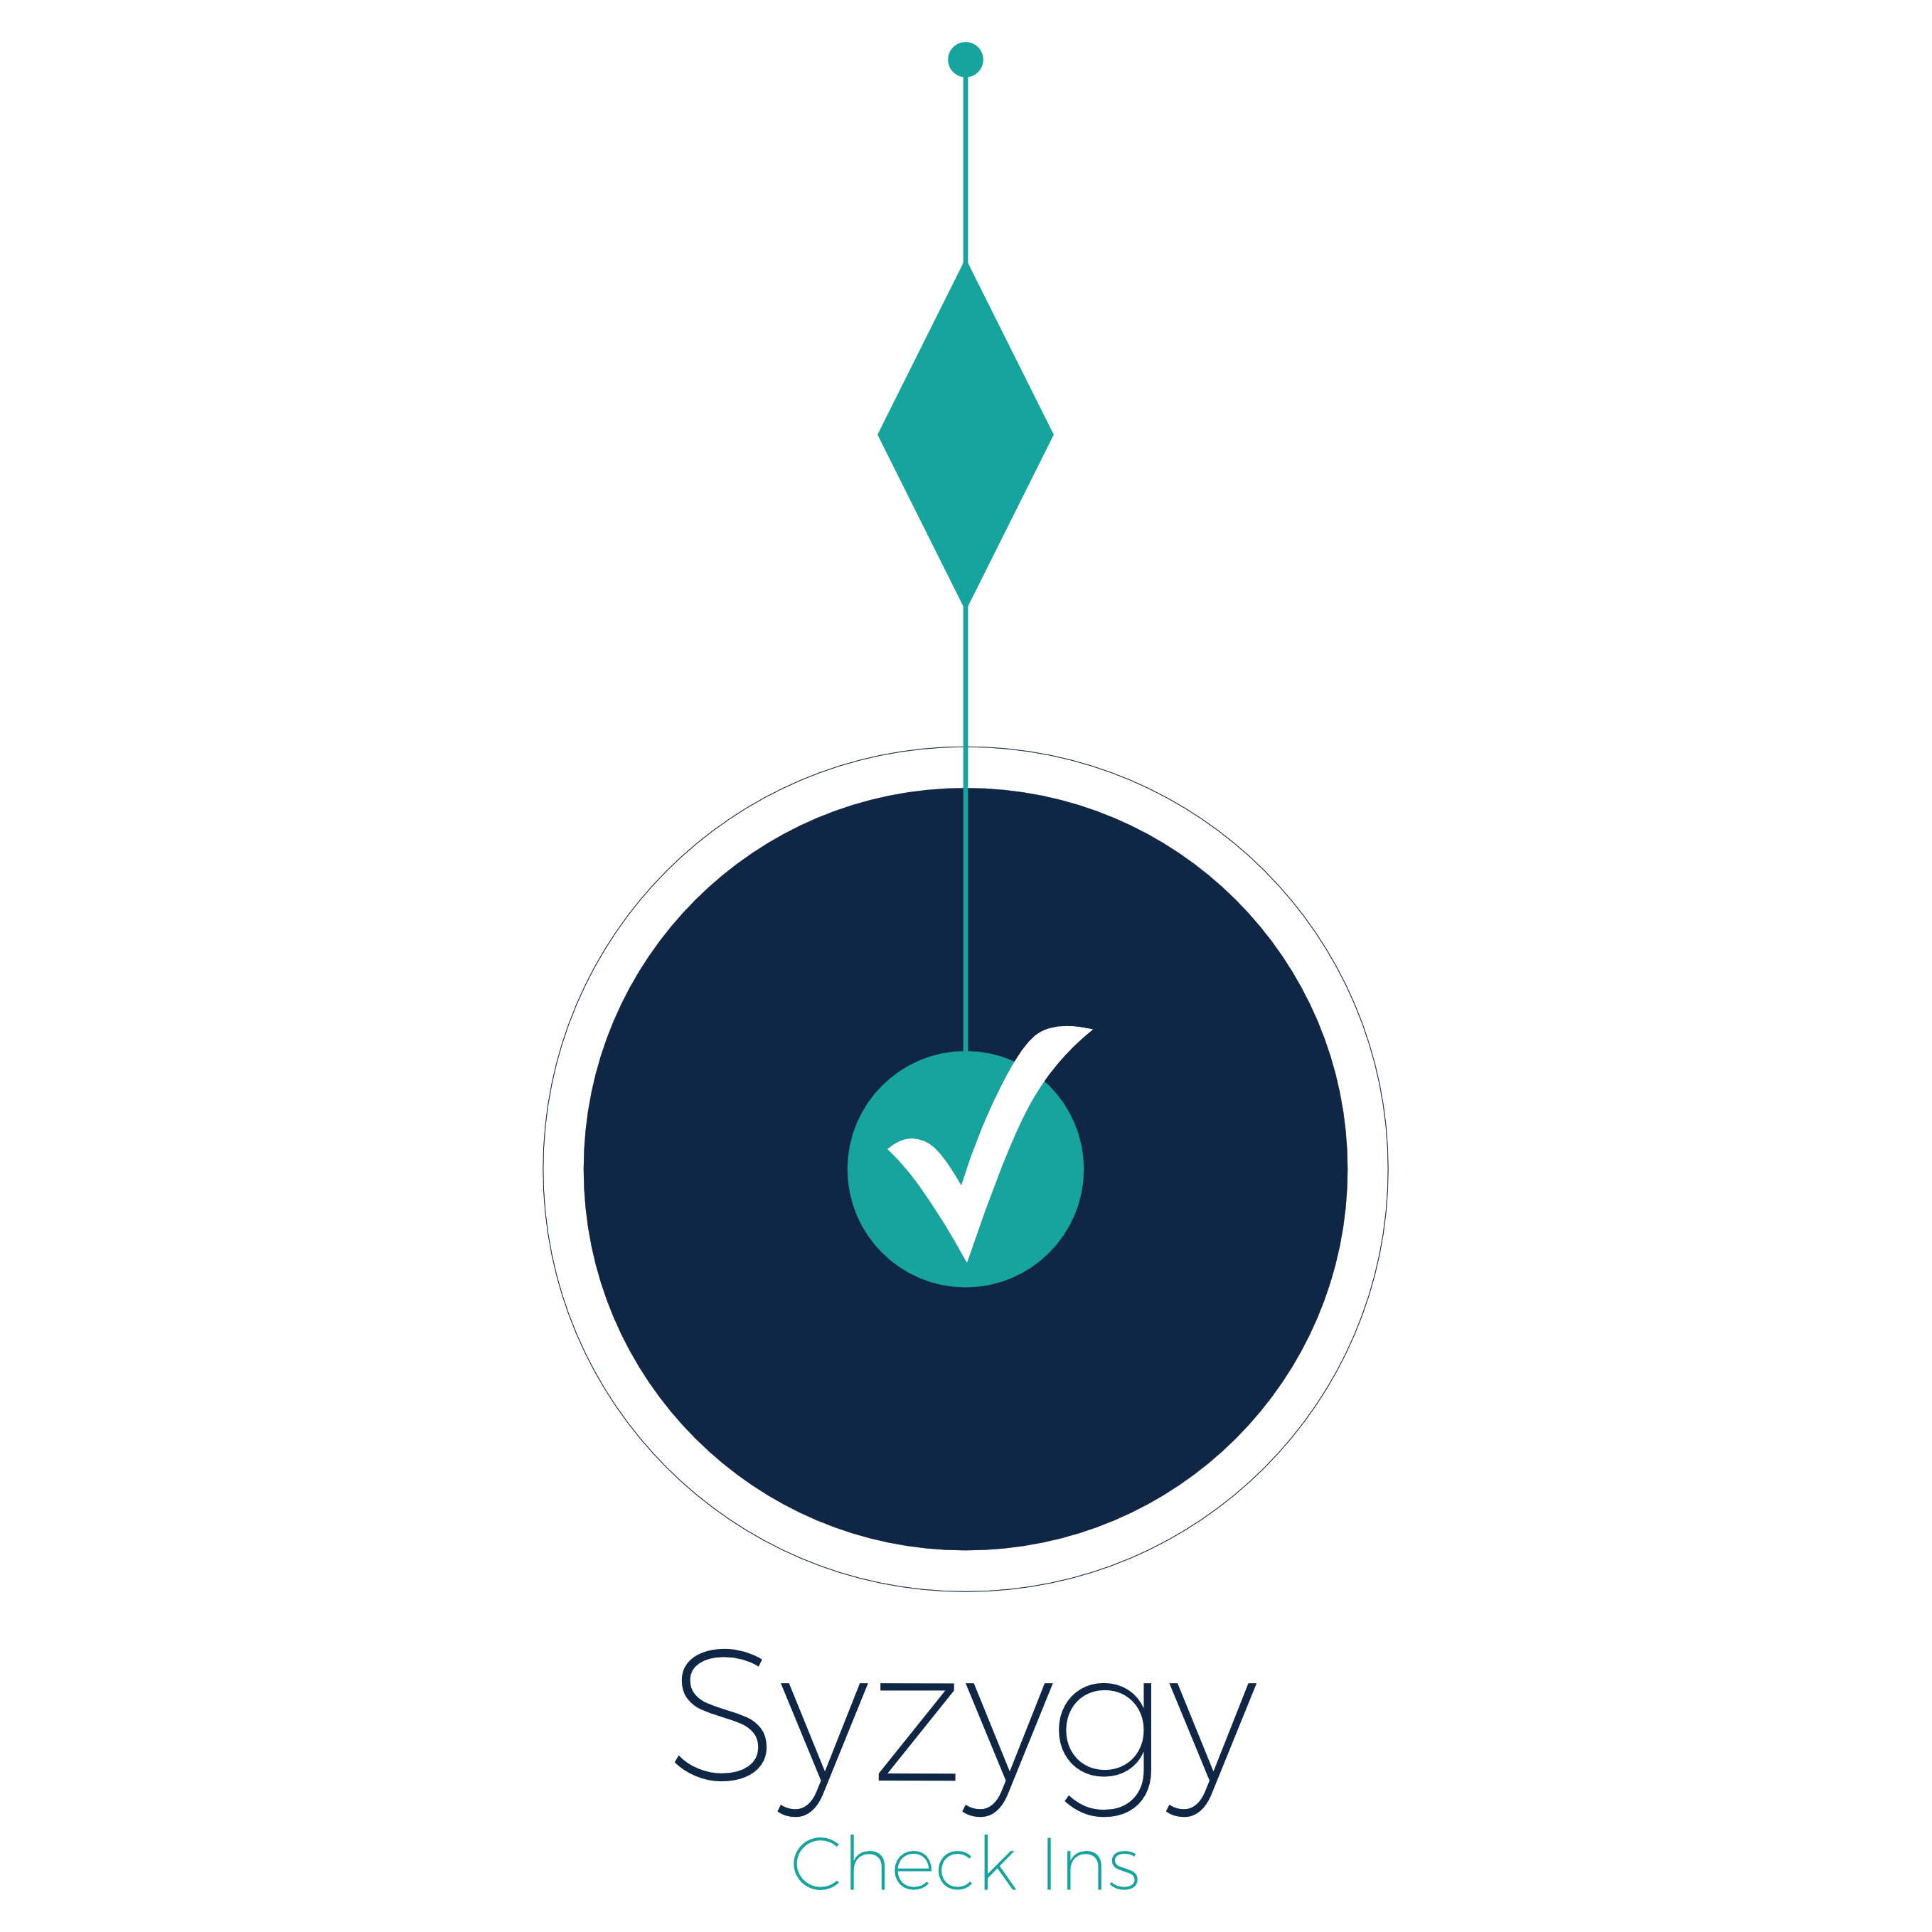 Syzygy Check Ins - Checking Connection